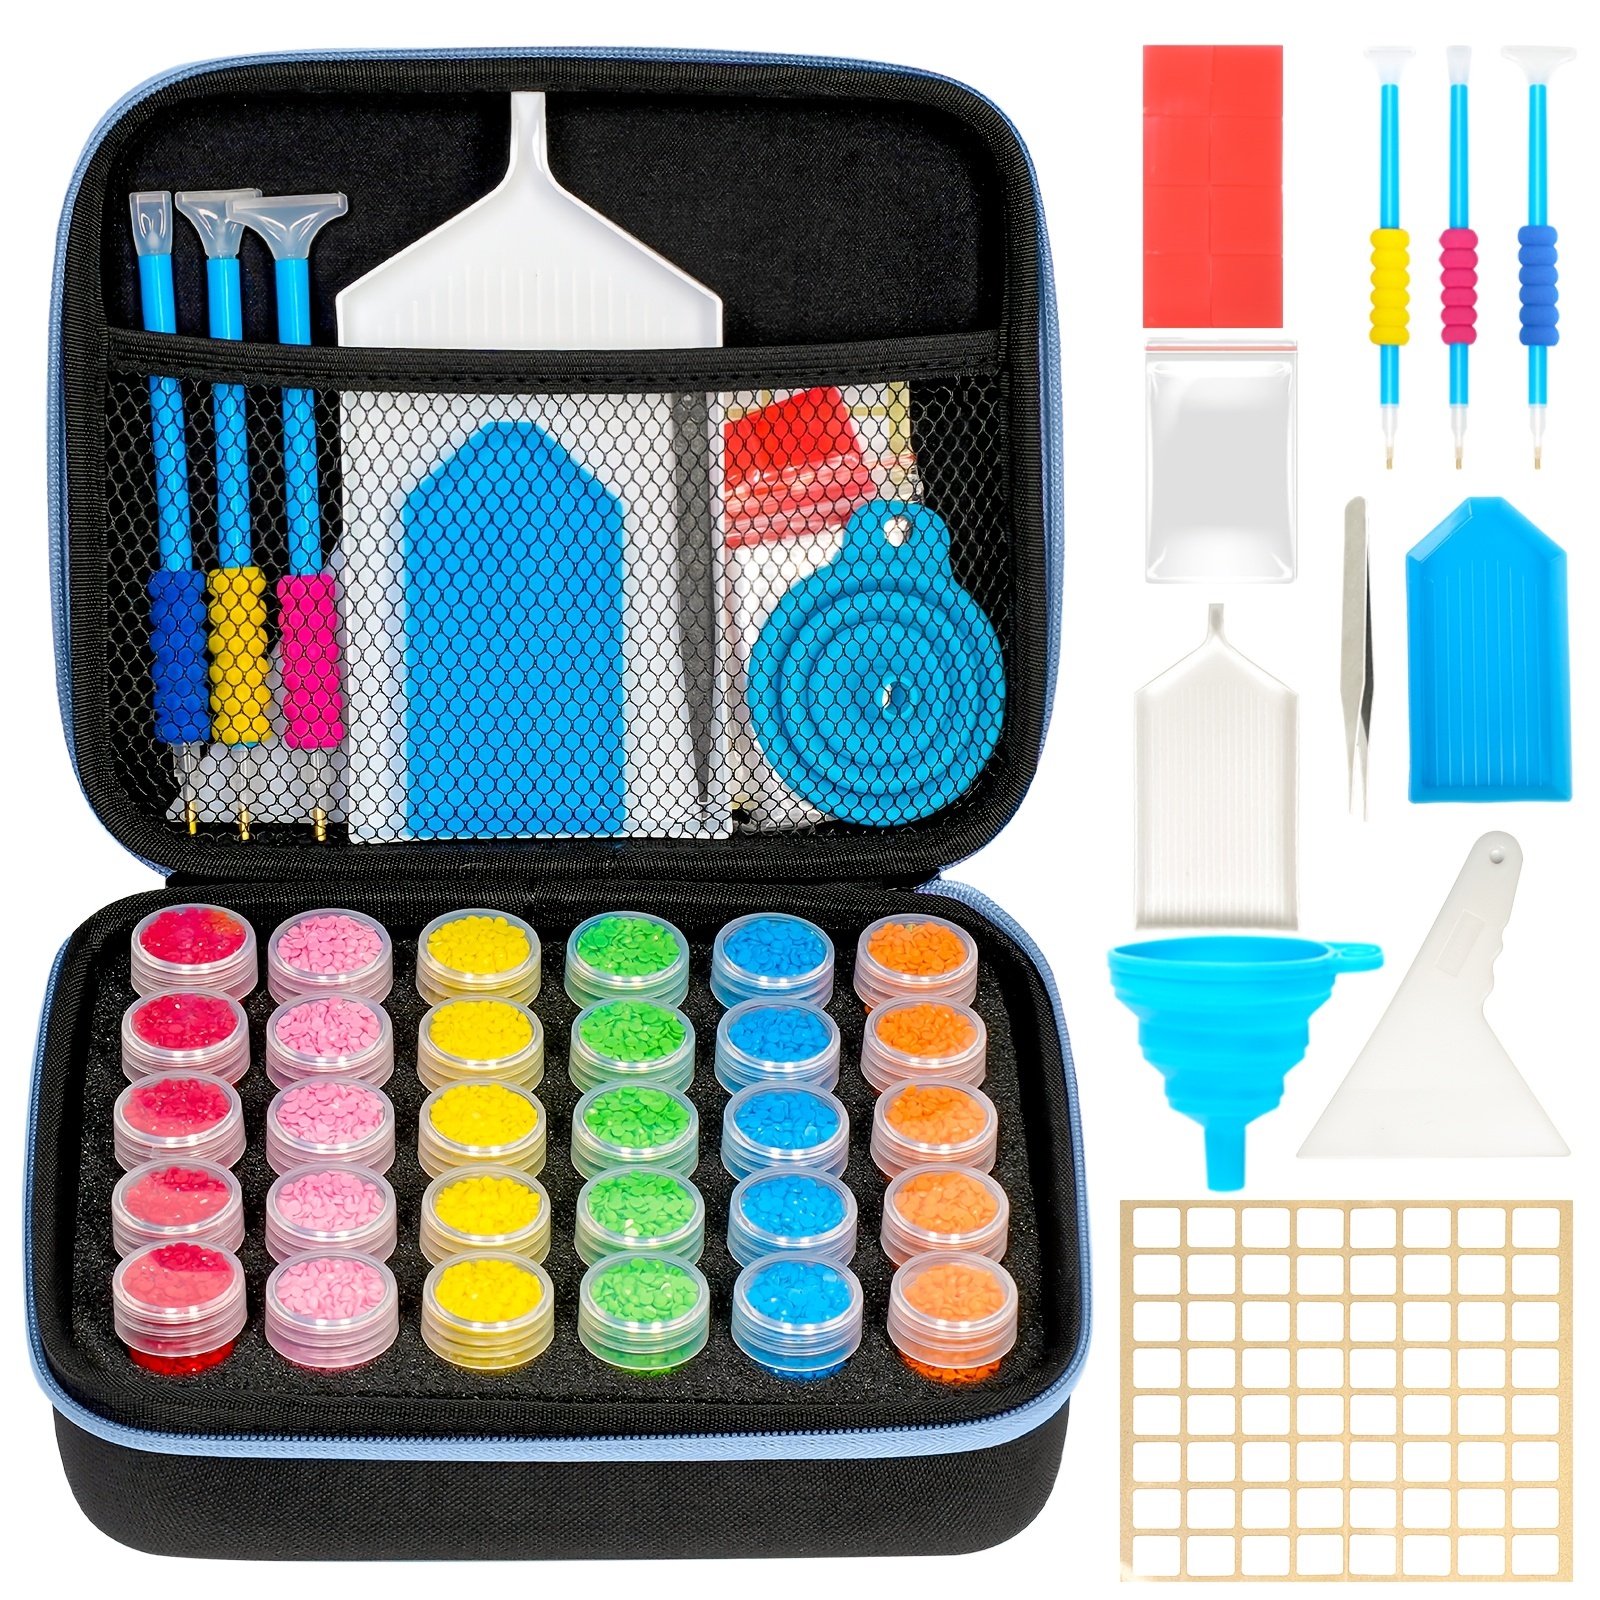  ARTDOT Diamond Painting Storage Boxes, 120 Slots Bead Storage  with 5D Diamond Art Accessories and Tools Kit : Arts, Crafts & Sewing